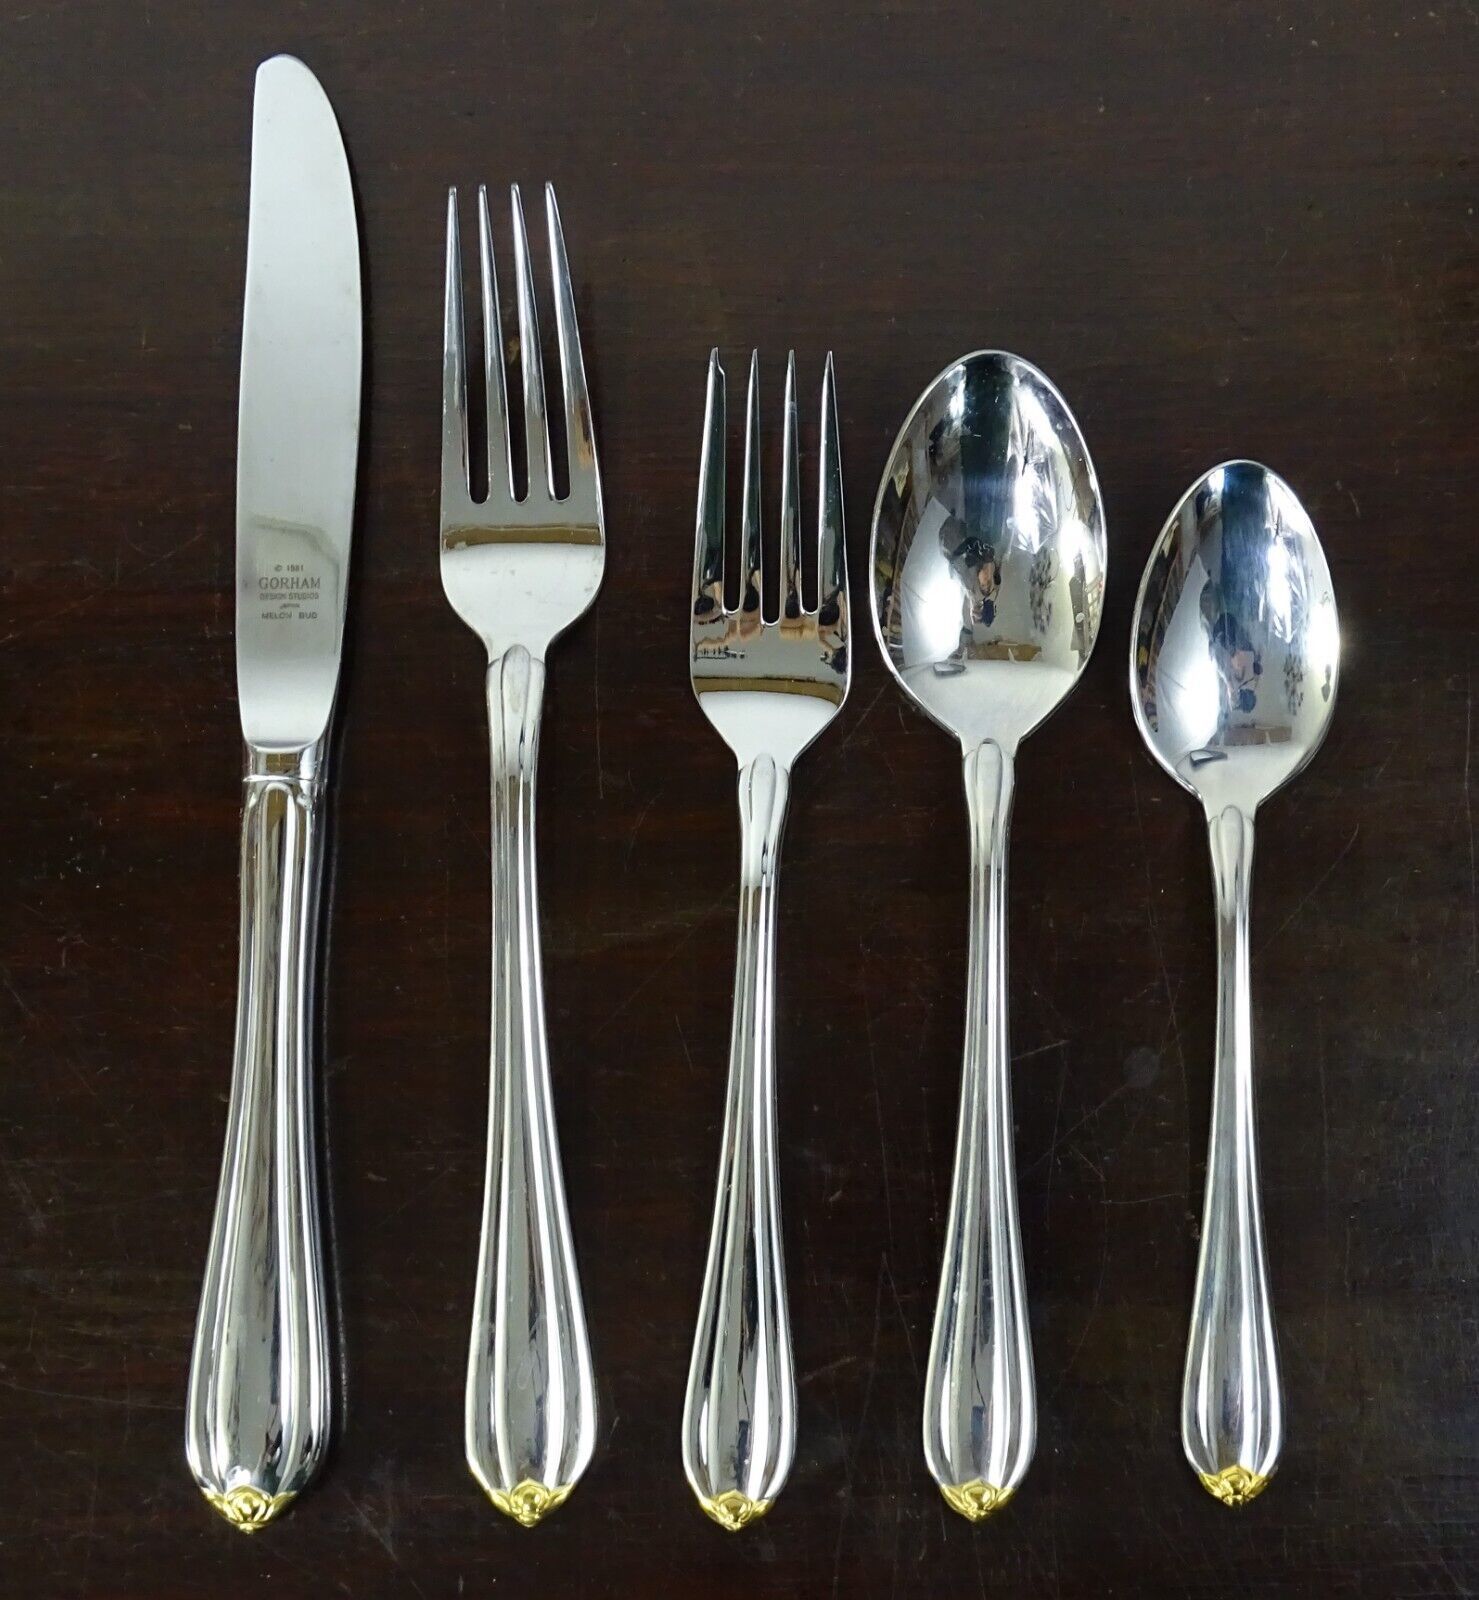 Gorham Silver Gold Tip Golden Melon Bud 5 Piece Place Setting, Made in Korea - $79.20